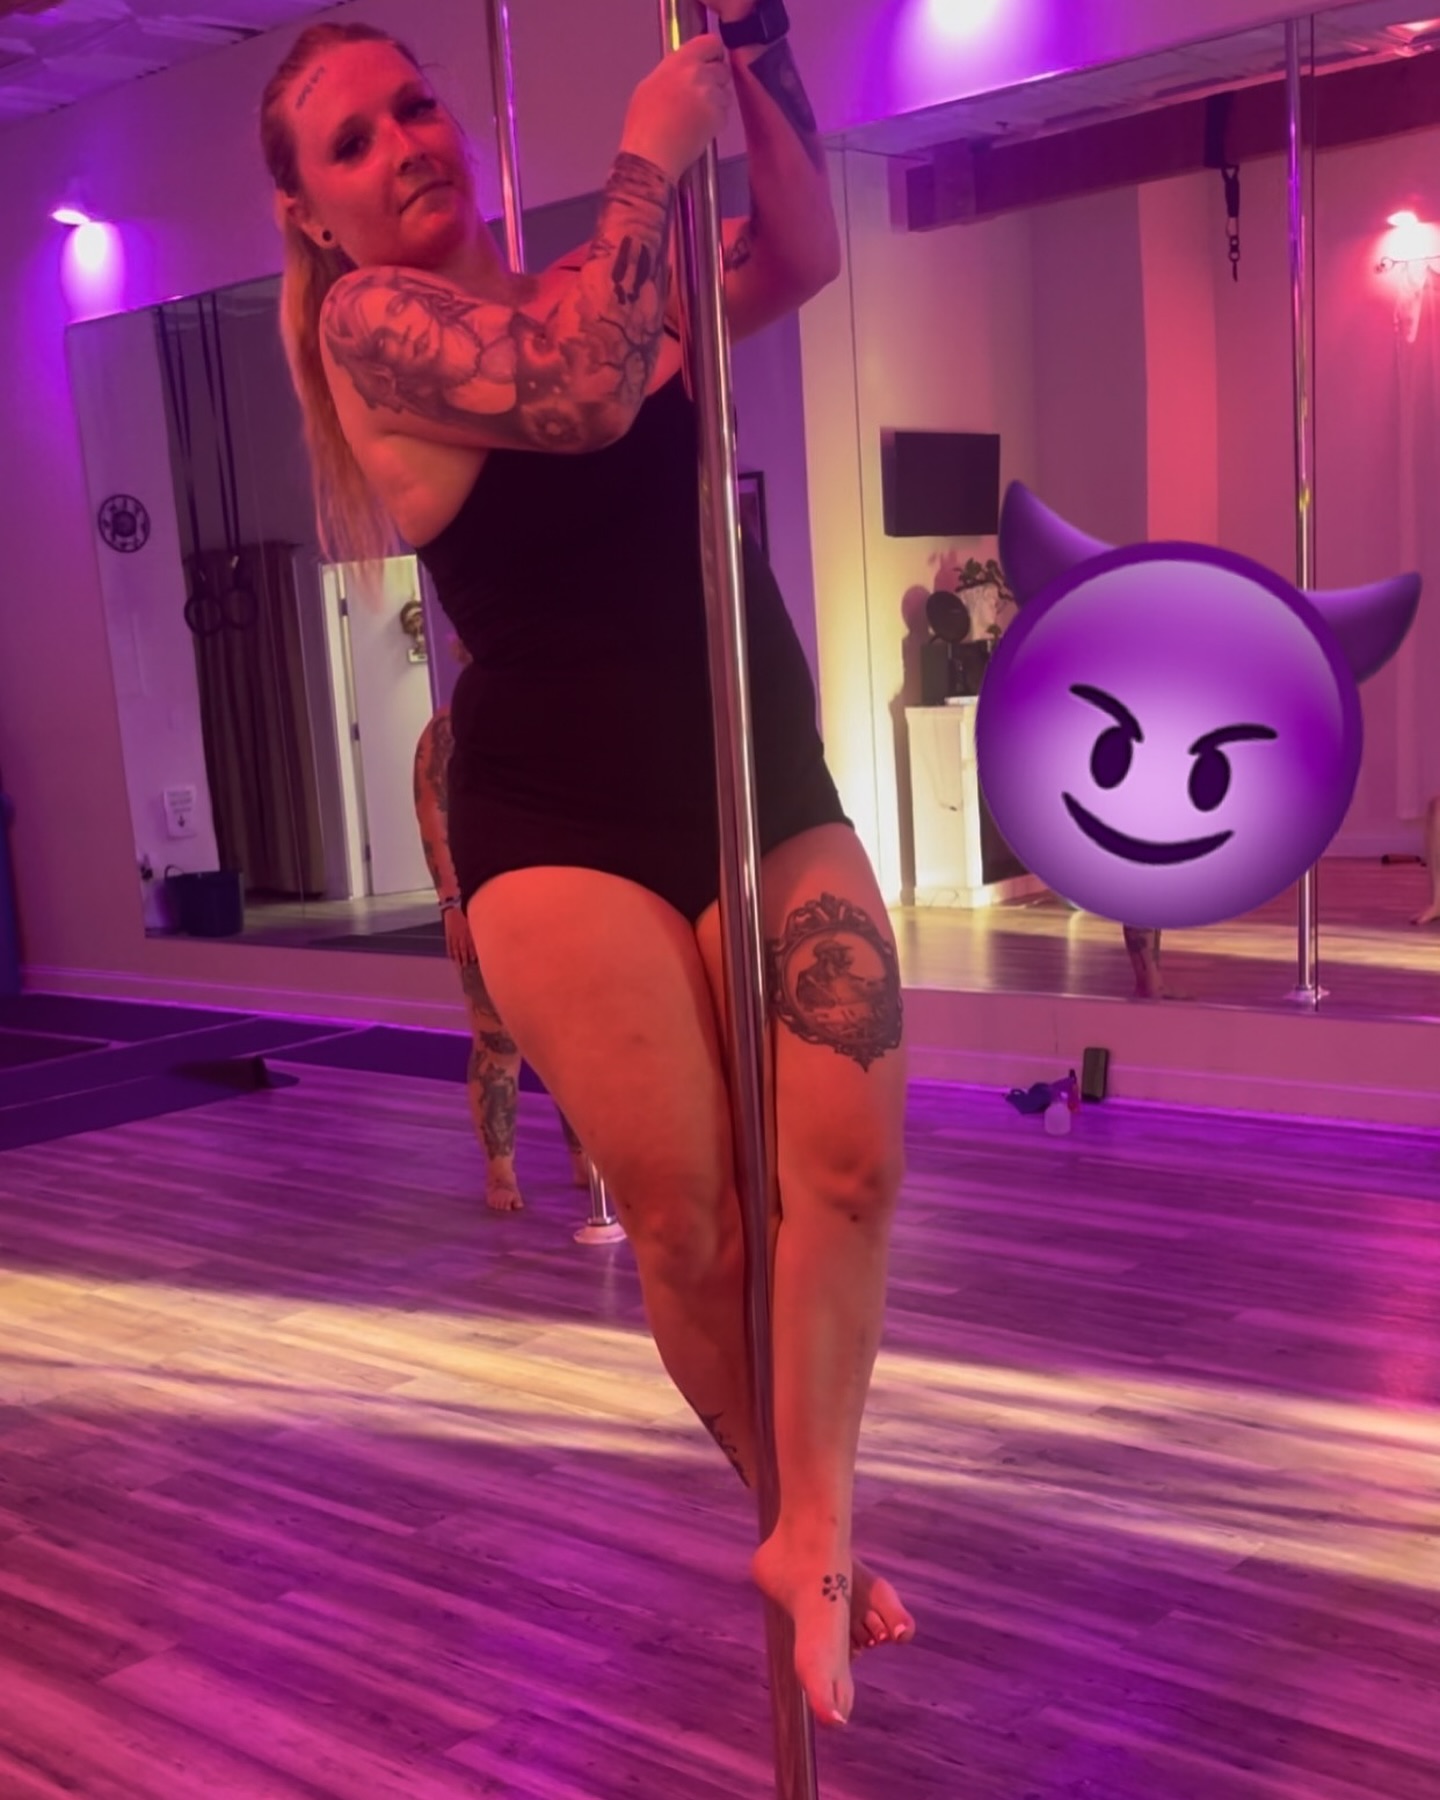 I love my Monday nights 🥰 #pole #poledance #fitness #fyp #fufillment #happiness